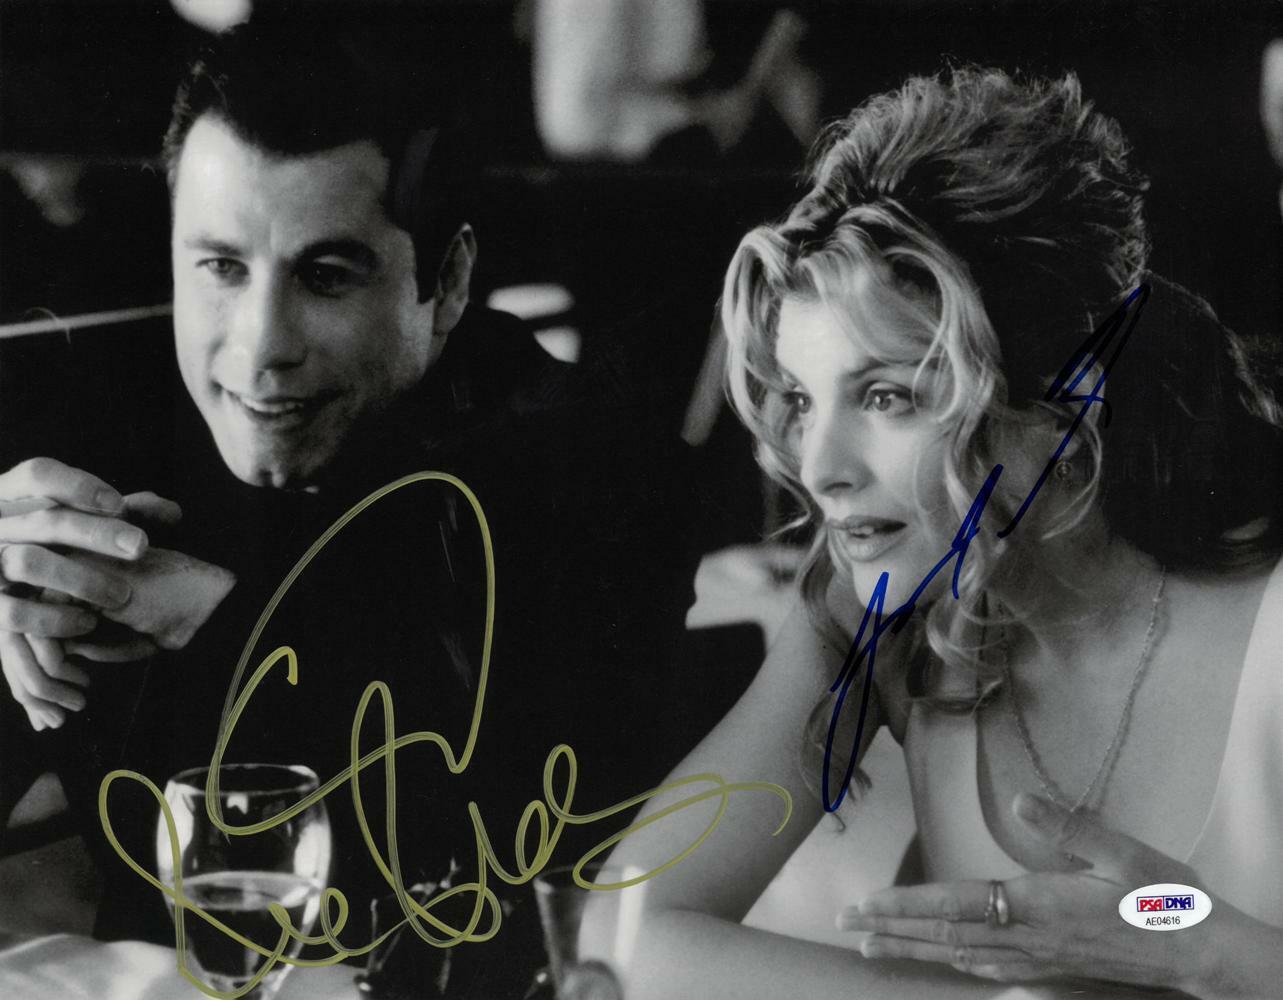 John Travolta/Rene Russo Signed Get Shorty Auto 11x14 Photo Poster painting PSA/DNA #AE04616